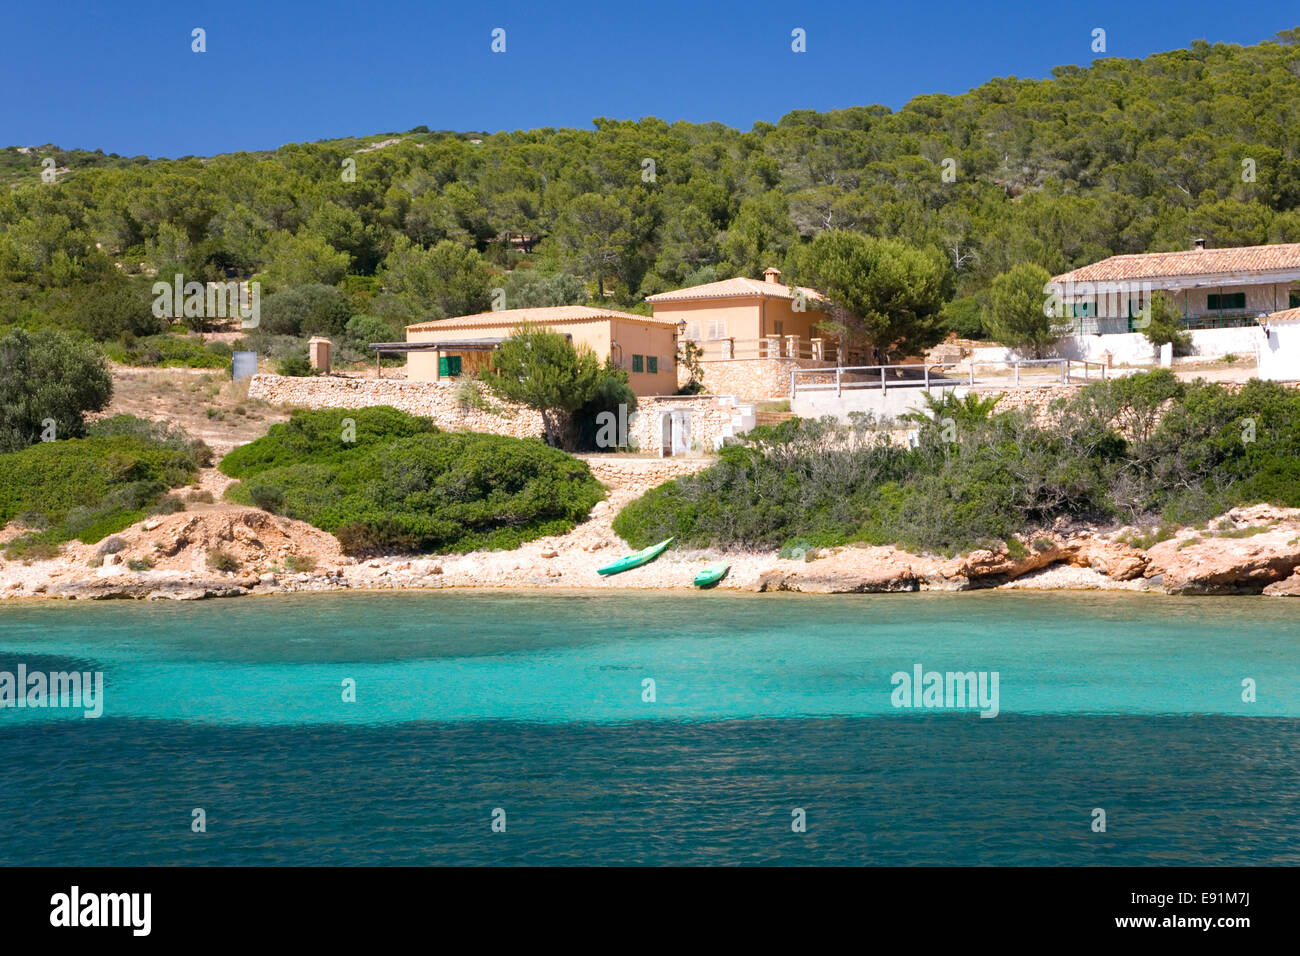 Island of Cabrera, Mallorca, Balearic Islands, Spain. View across bay to waterside houses, kayaks on shore. Stock Photo